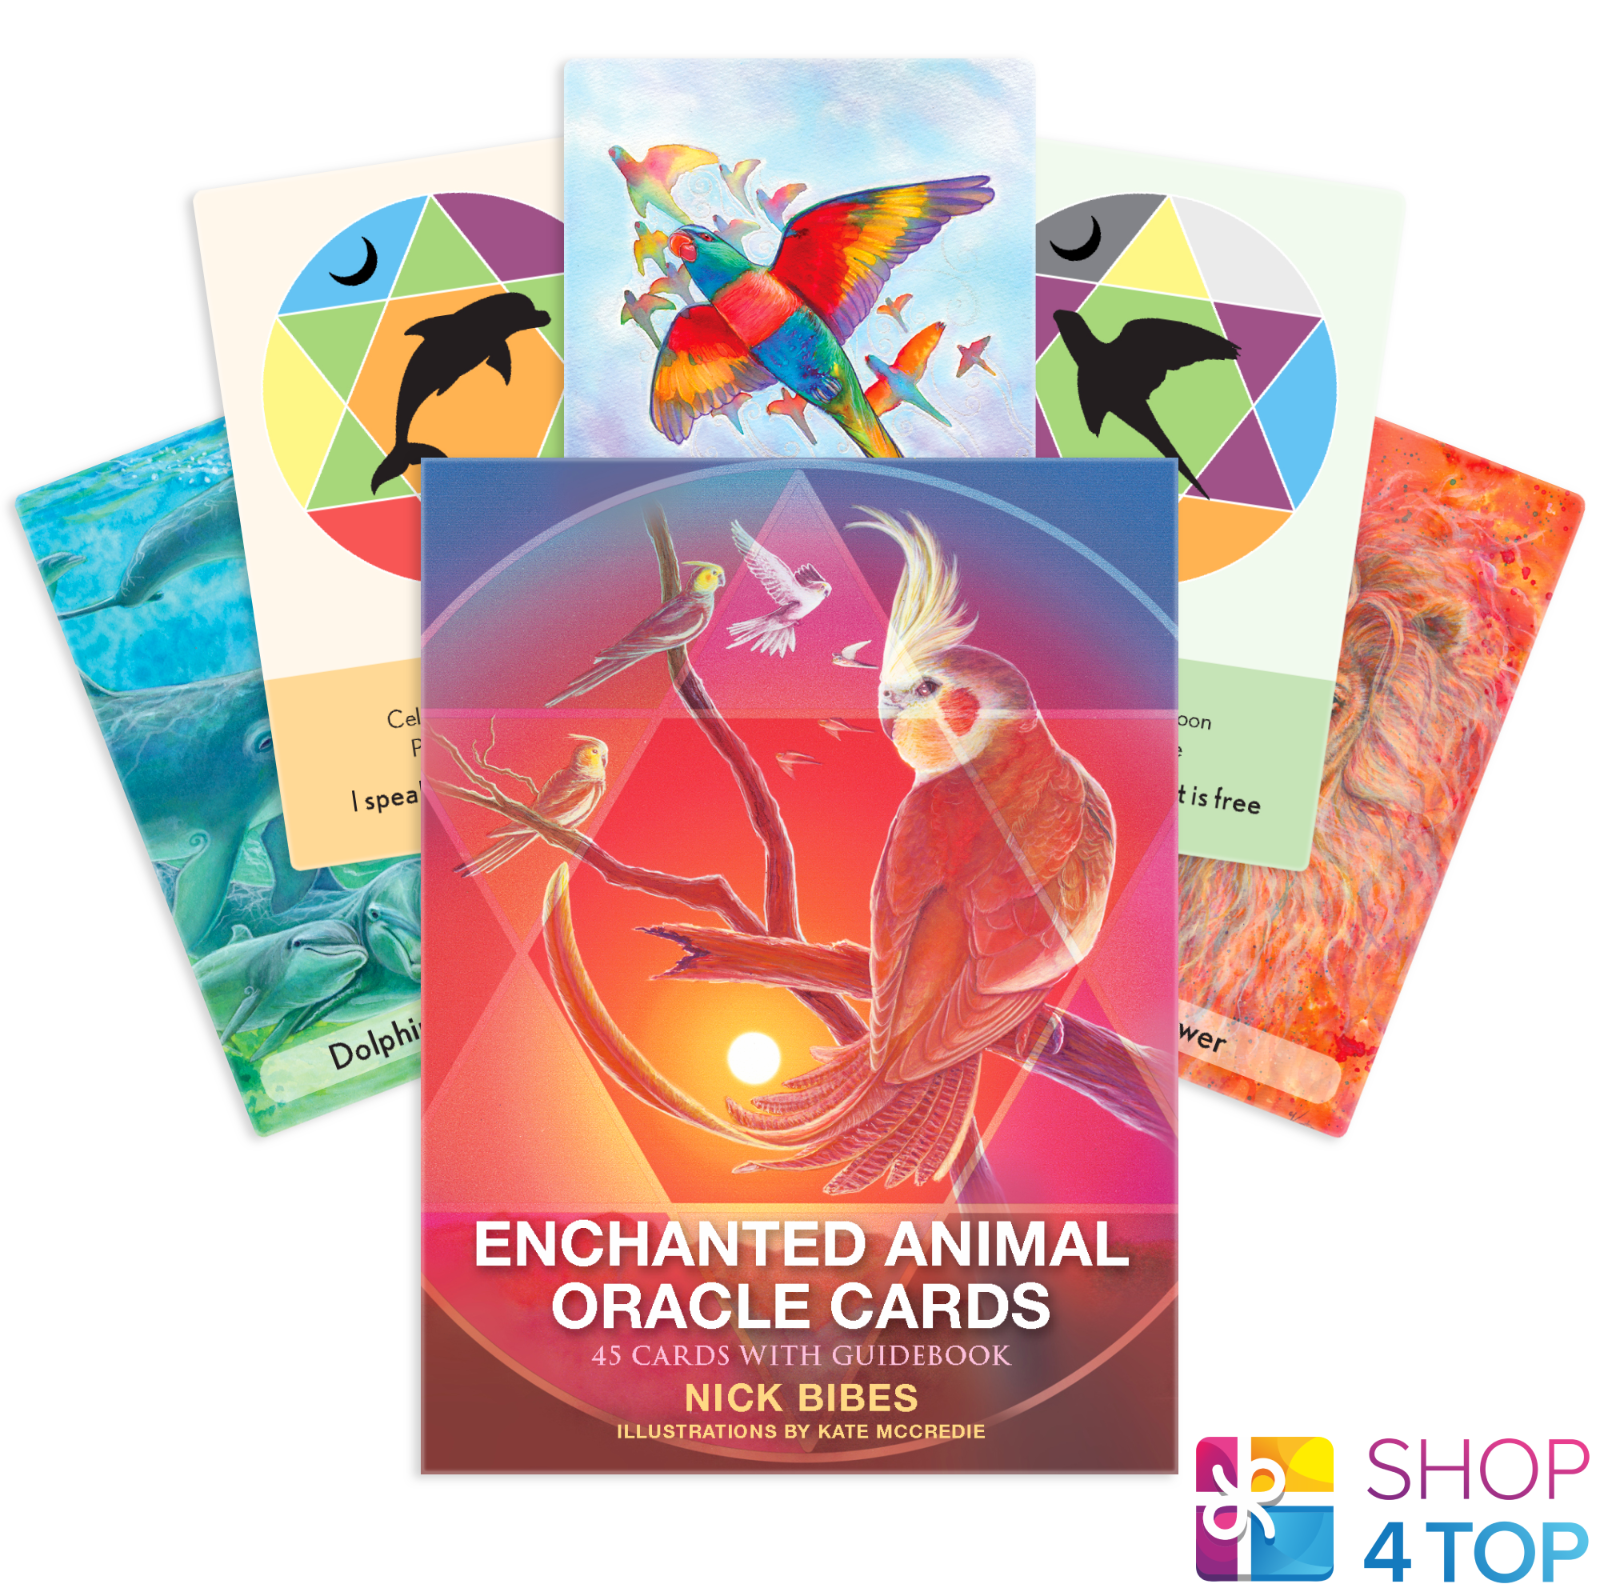 Enchanted Animal Oracle Cards Deck Animal Dreaming Esoteric Bibes Guidance New